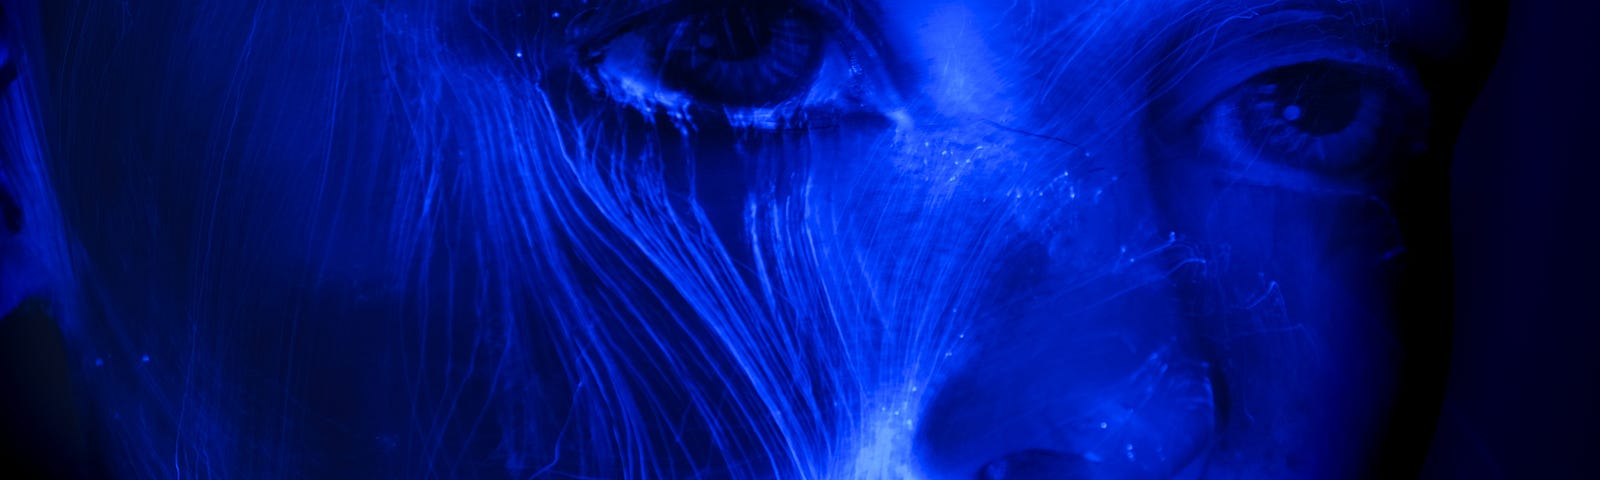 Mystical looking face of a woman blue and glowing with lighter glowing lines on a black background prudence louise Medium